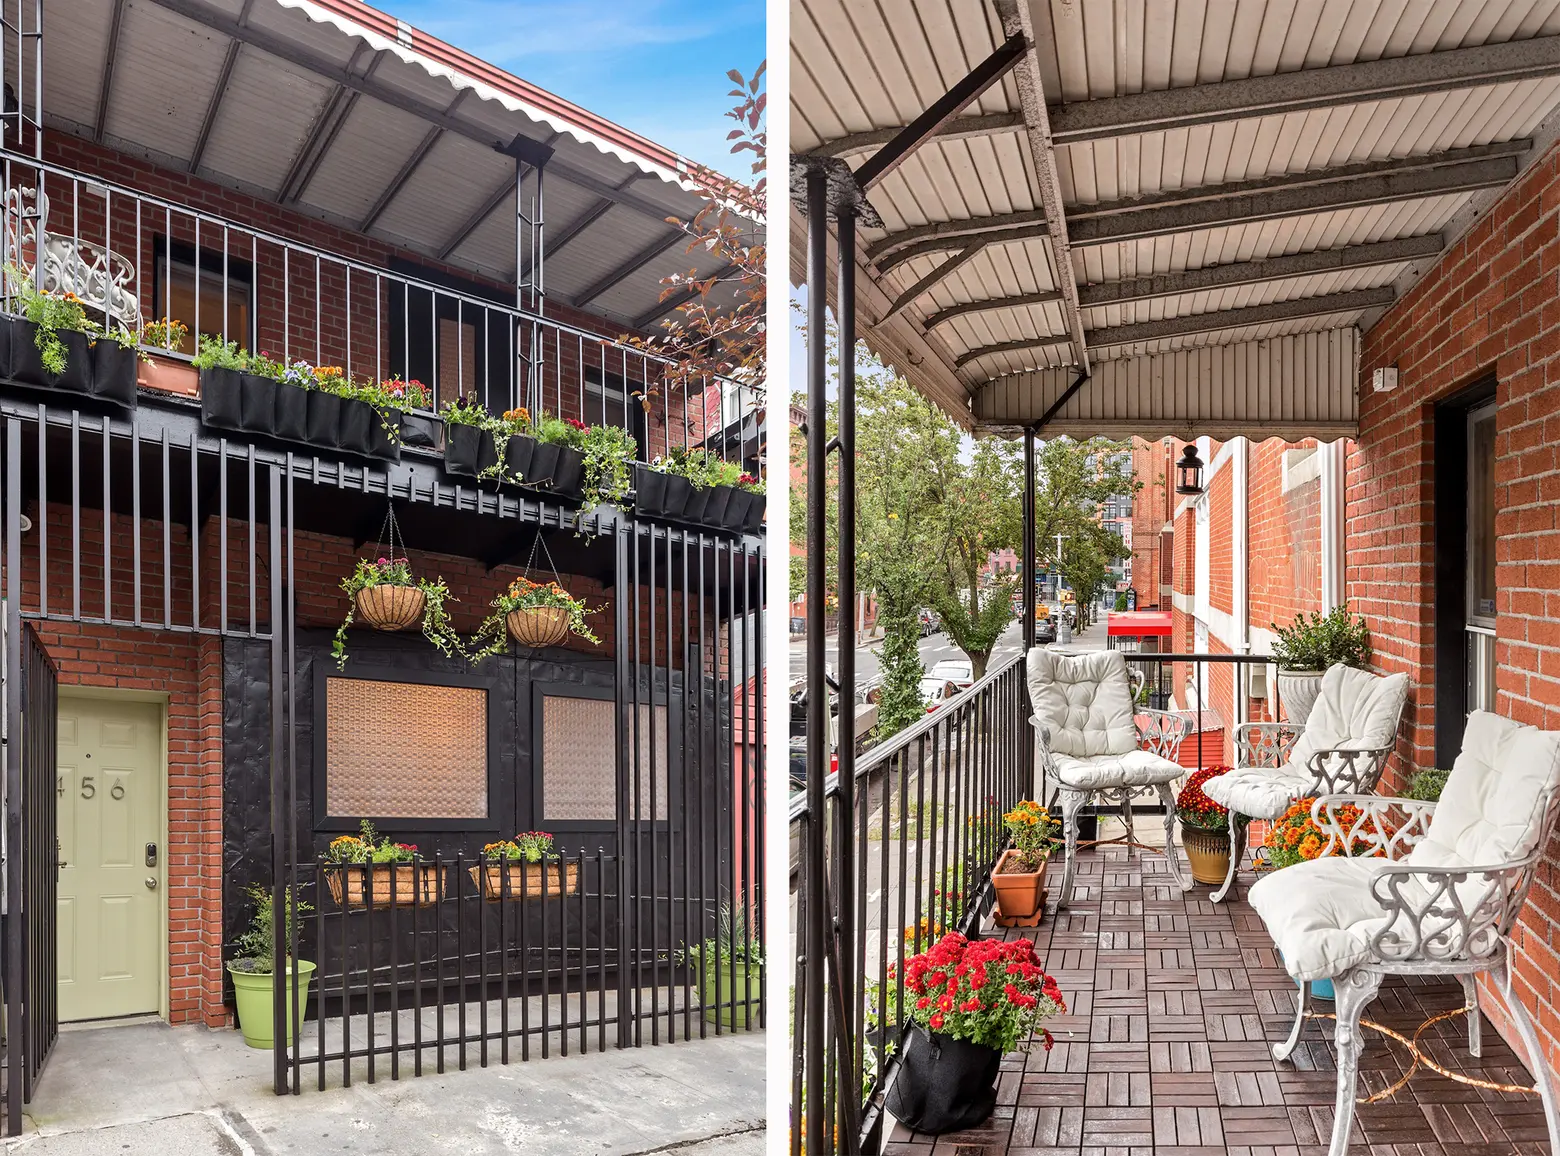 $950K Bed-Stuy cottage has a New Orleans-style balcony and doors from the Domino Sugar Factory